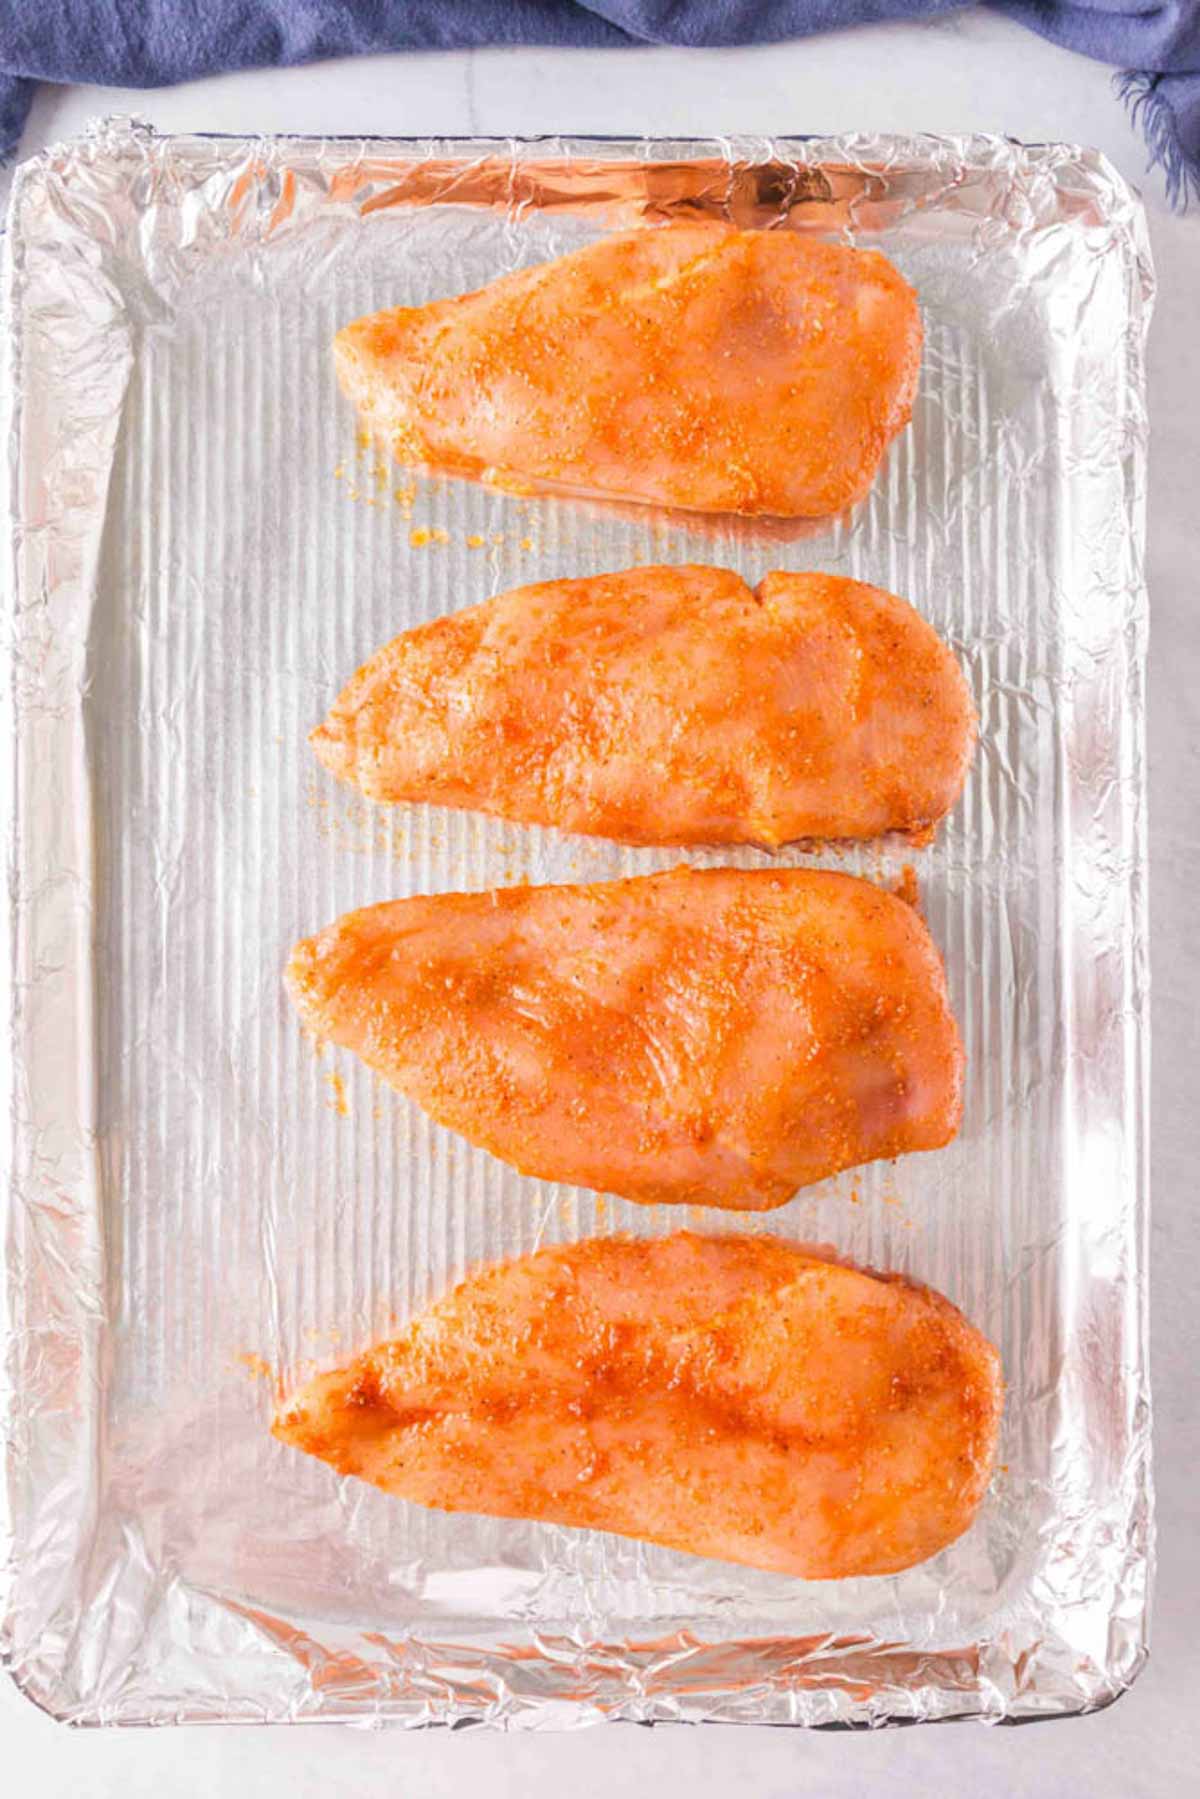 Uncooked chicken breasts on a baking sheet seasoned. 